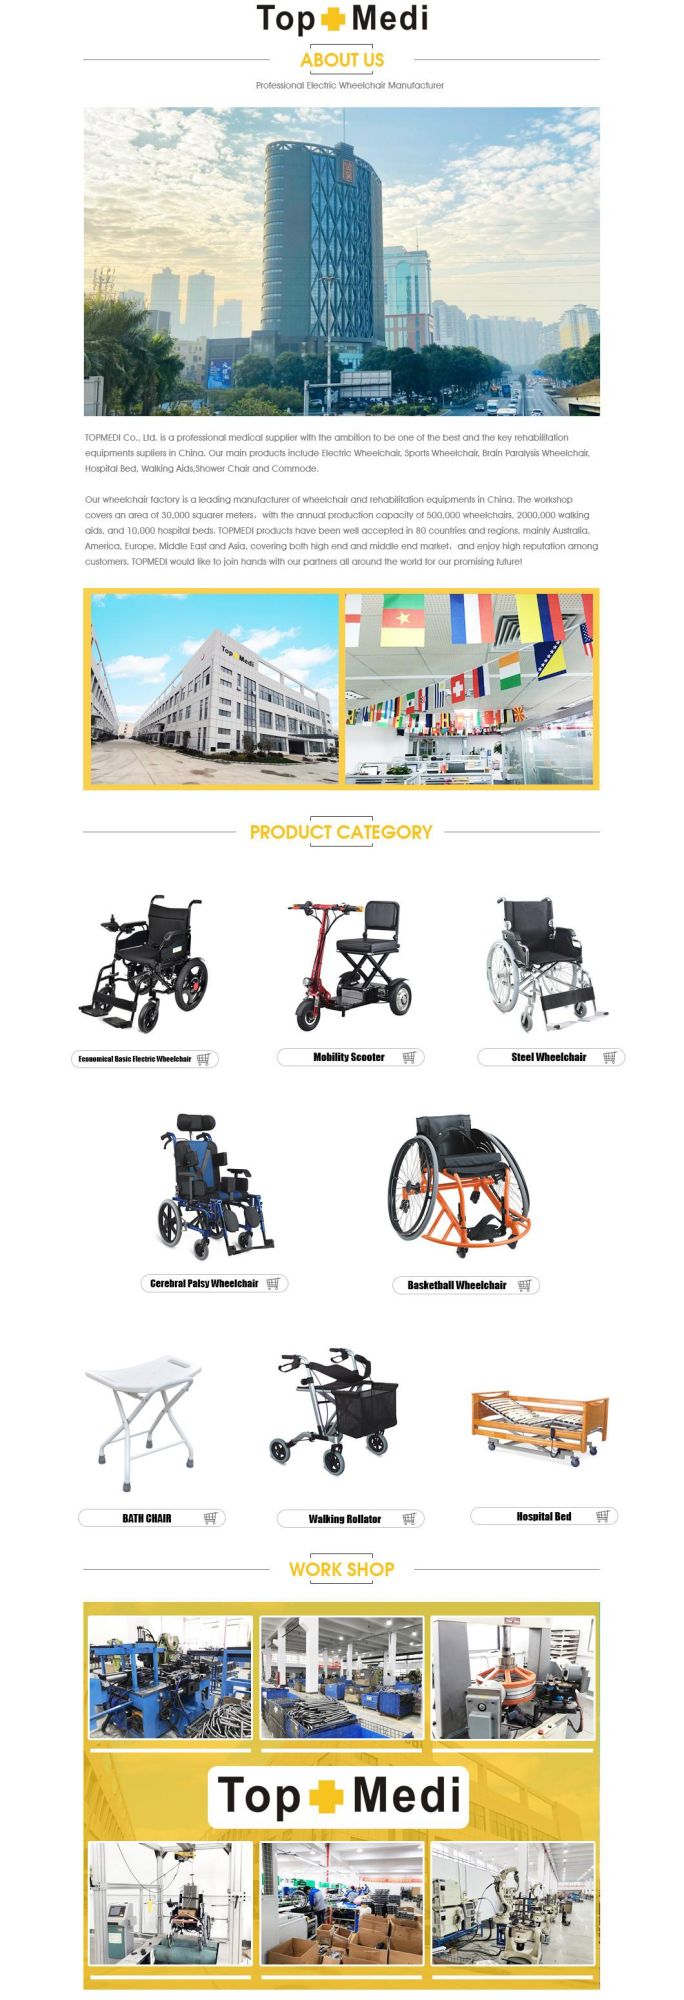 Medical Wheelchair Electric Wheelchair for Elderly Cheap Price Motor Wheelchair Home Use Tew888